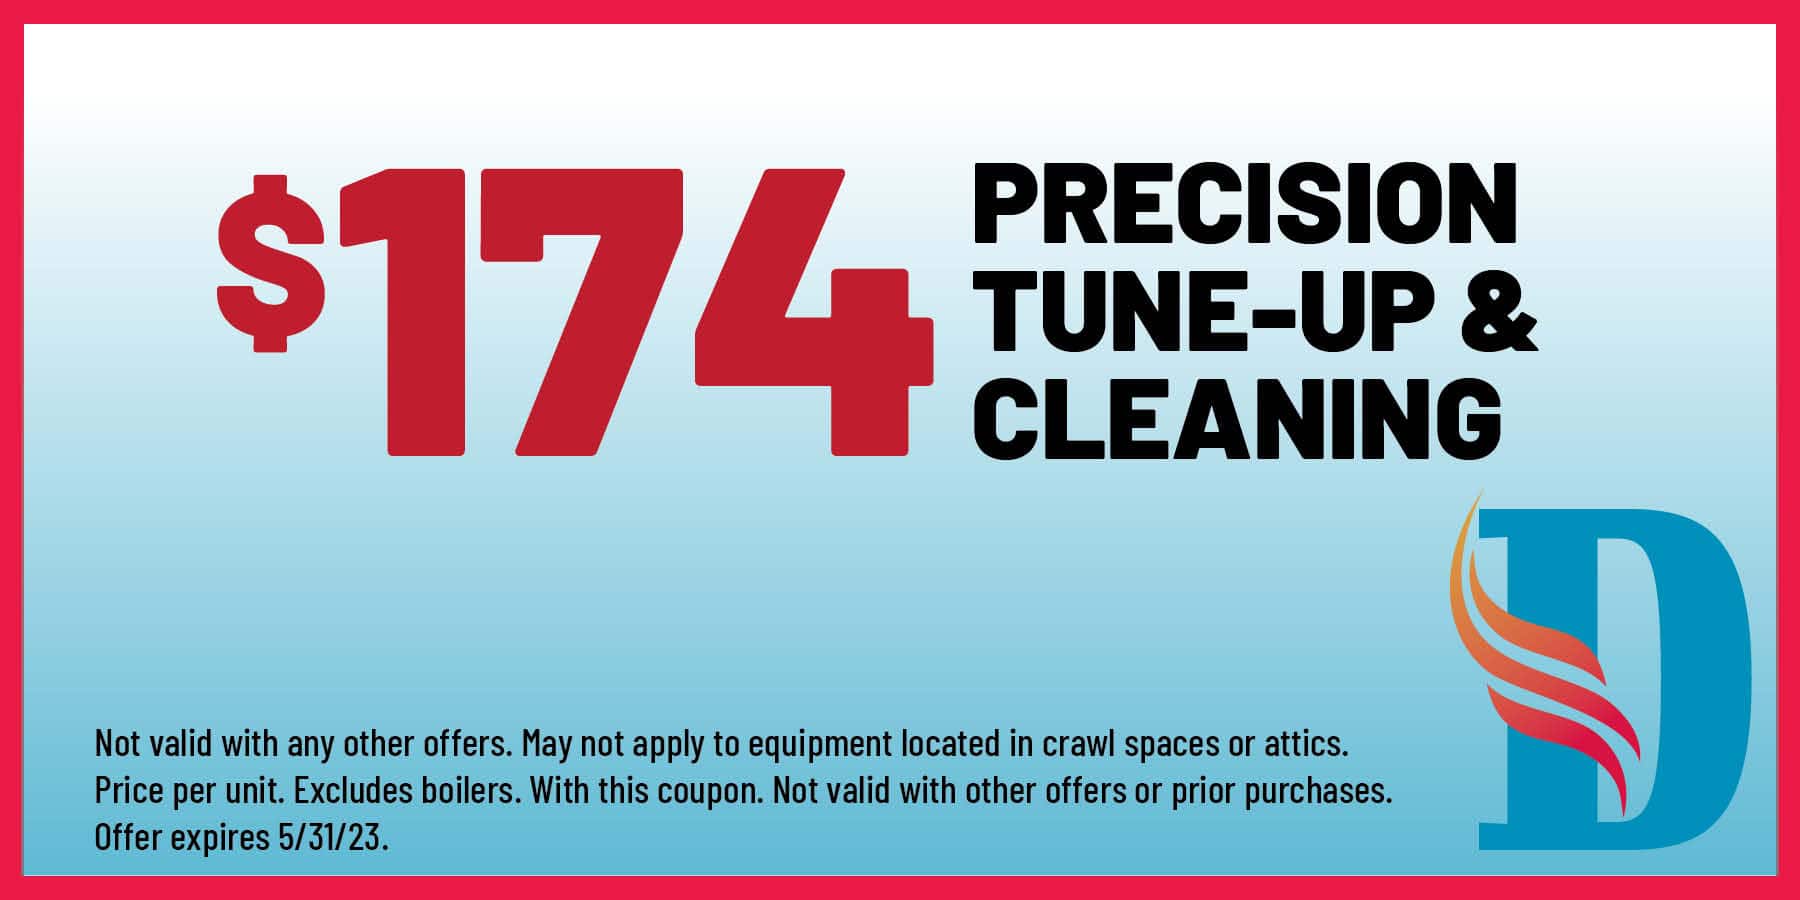 $174 precision tune-up & cleaning coupon.